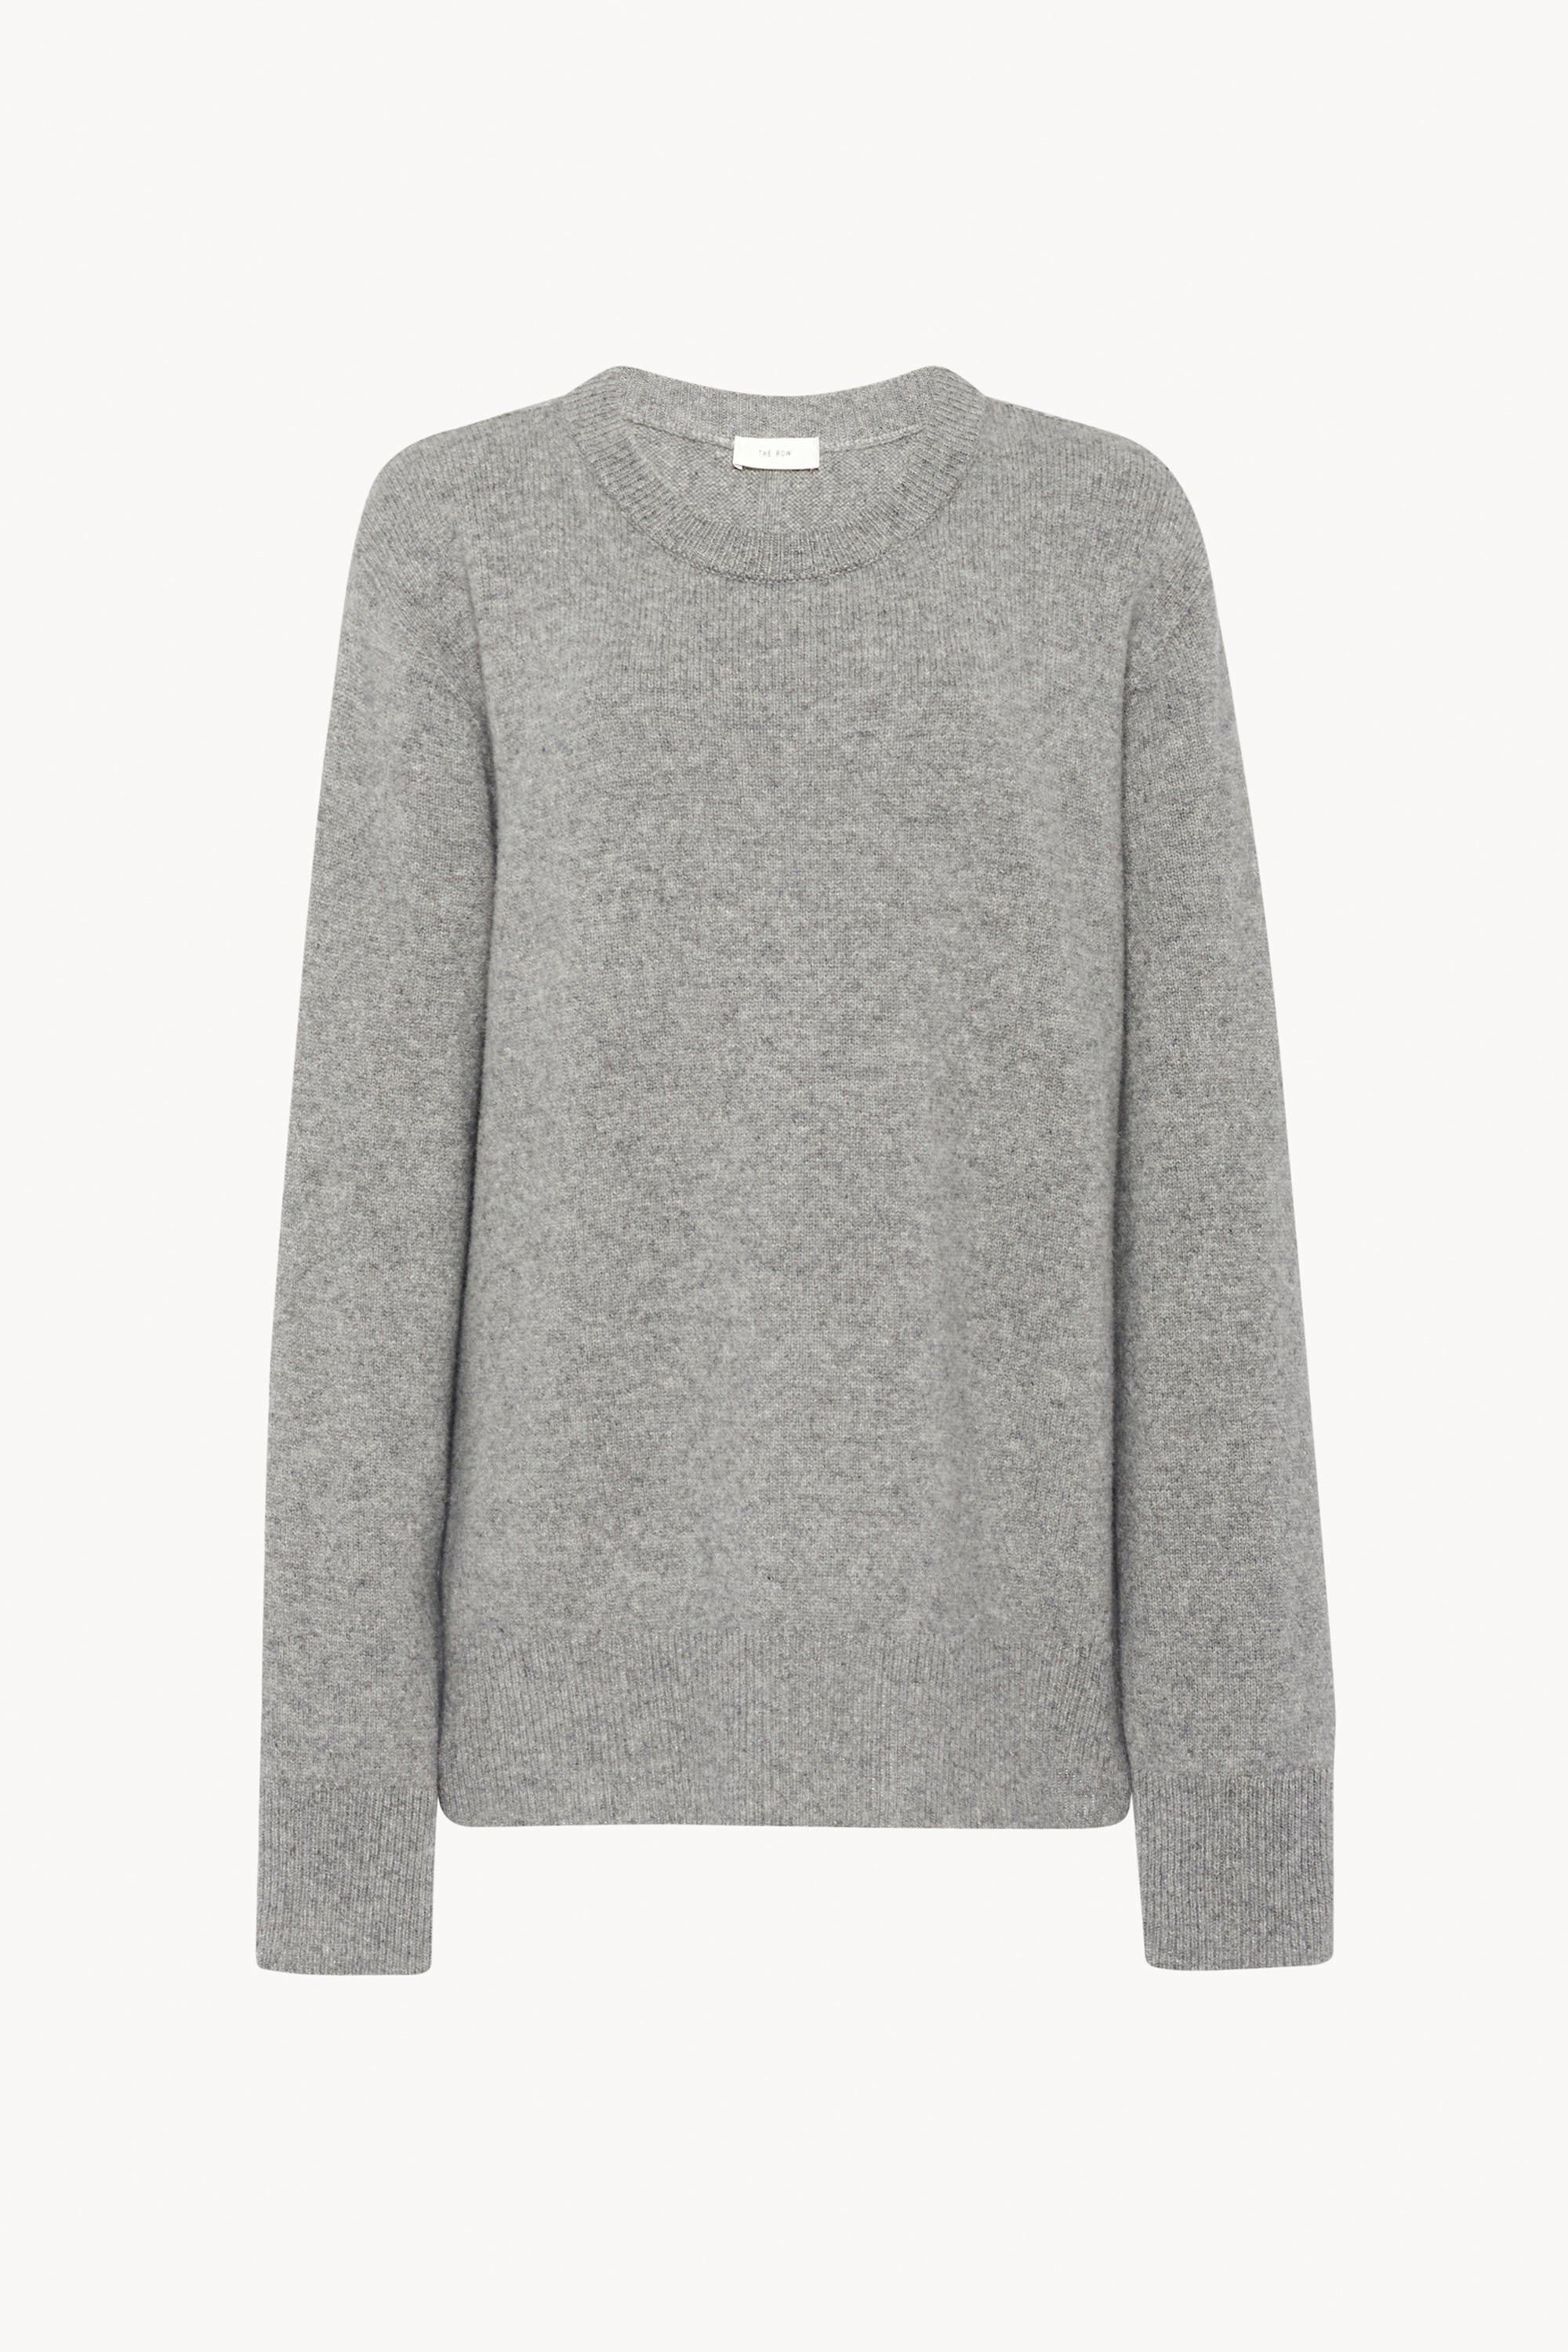 Sibem Top in Wool and Cashmere - 1